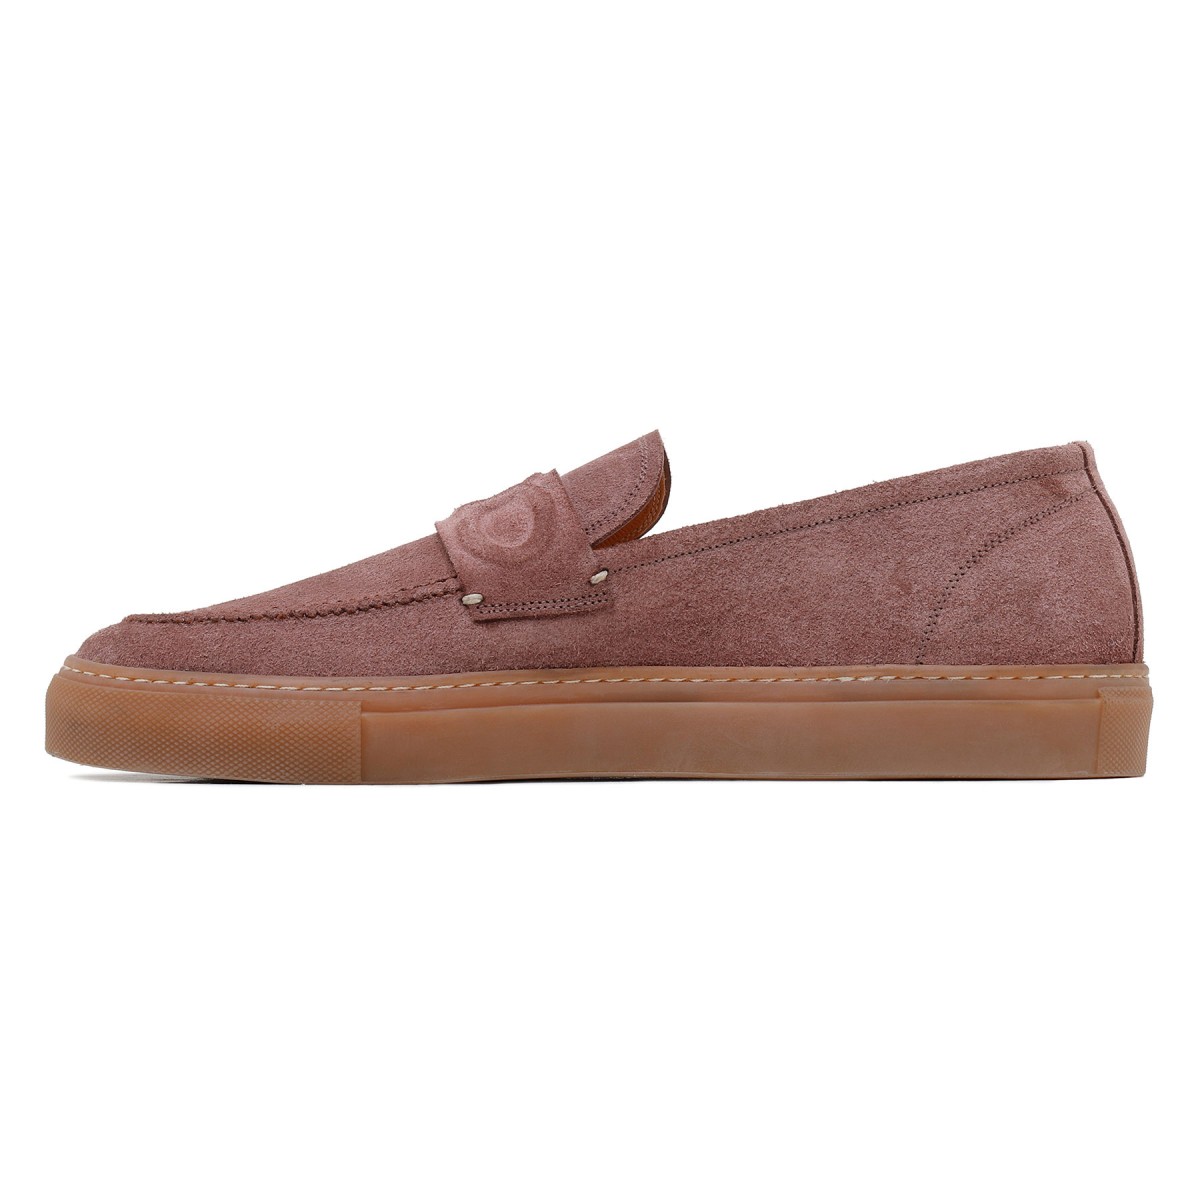 St. Tropez brown suede loafers